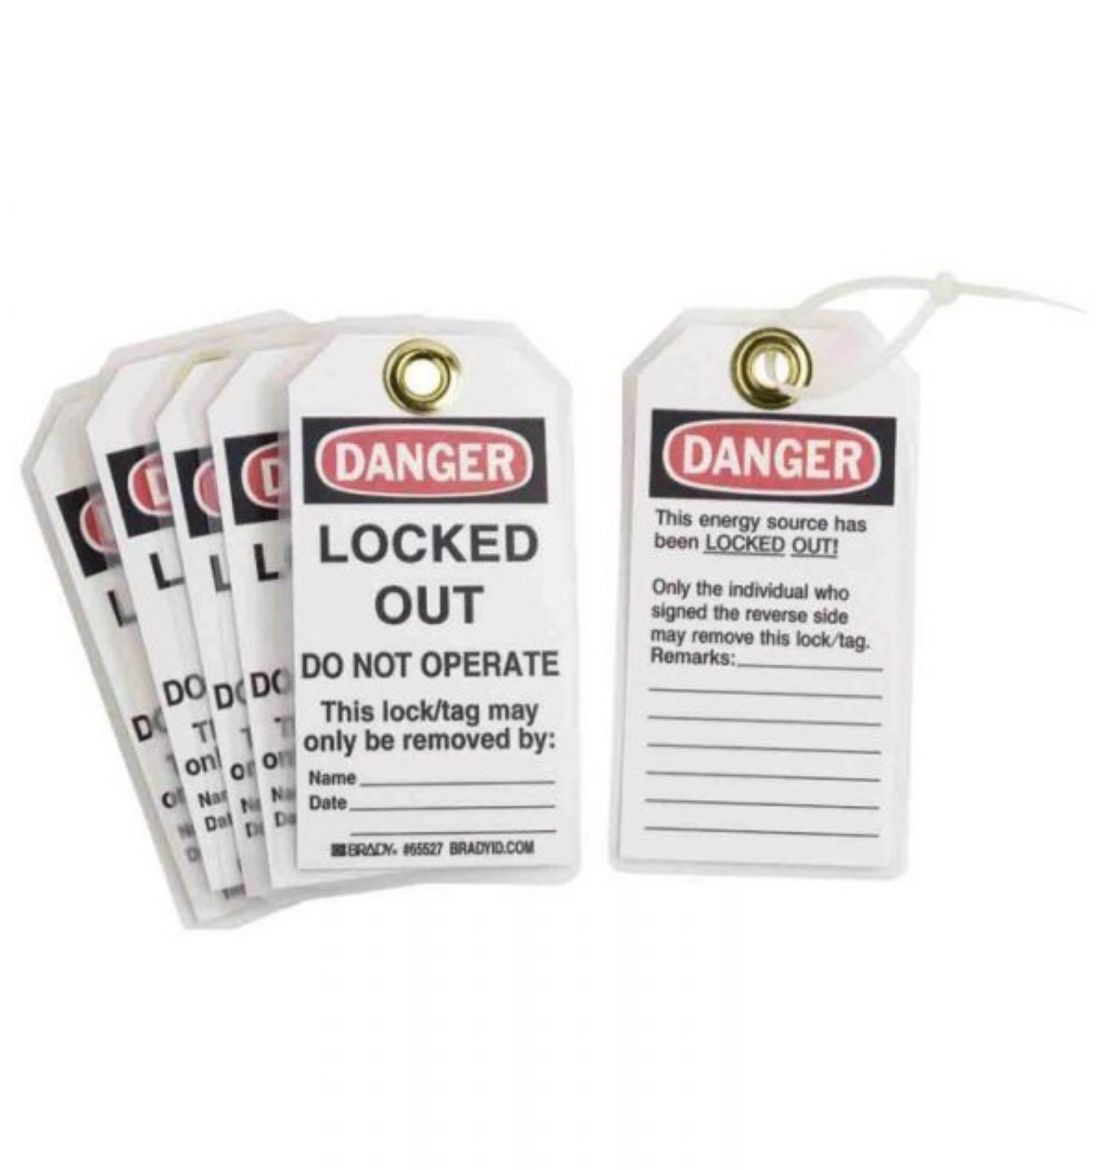 Picture of DANGER LOCKED OUT LOCKOUT TAGS - REVERSE SIDE ONLY THE INDIVIDUAL WHO, HEAVY DUTY POLYESTER